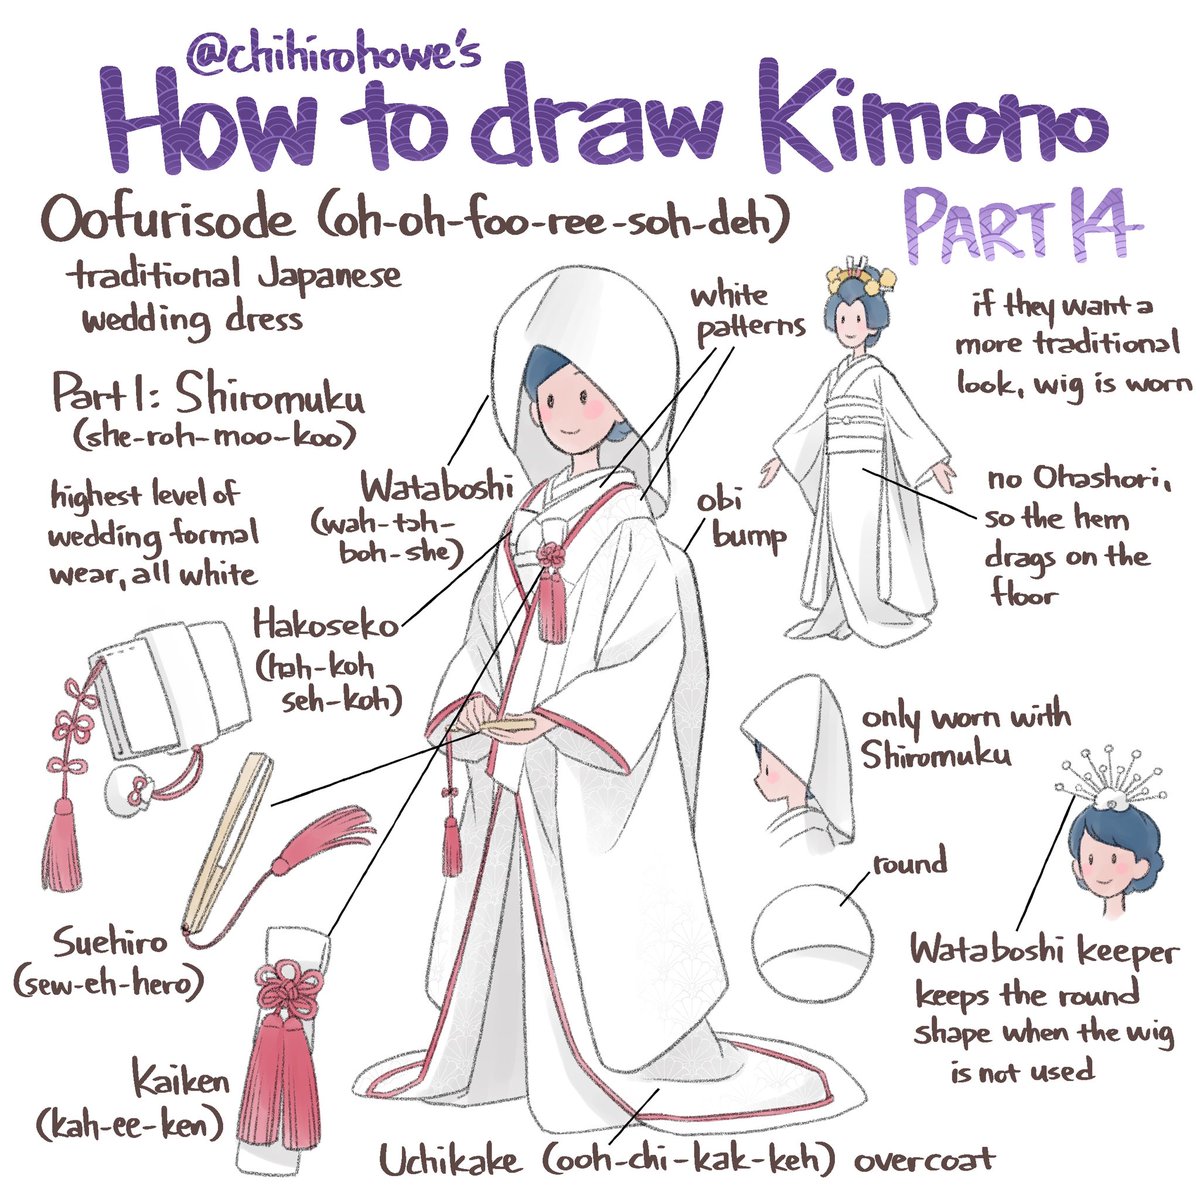  #kimono Part 14: ShiromukuThere are several types of wedding kimono in Japan.Shiromuku is the oldest type.Typically it’s all white, but sometimes they put accents (red or gold).The wedding kimono has the longest sleeves, around 114cm long.